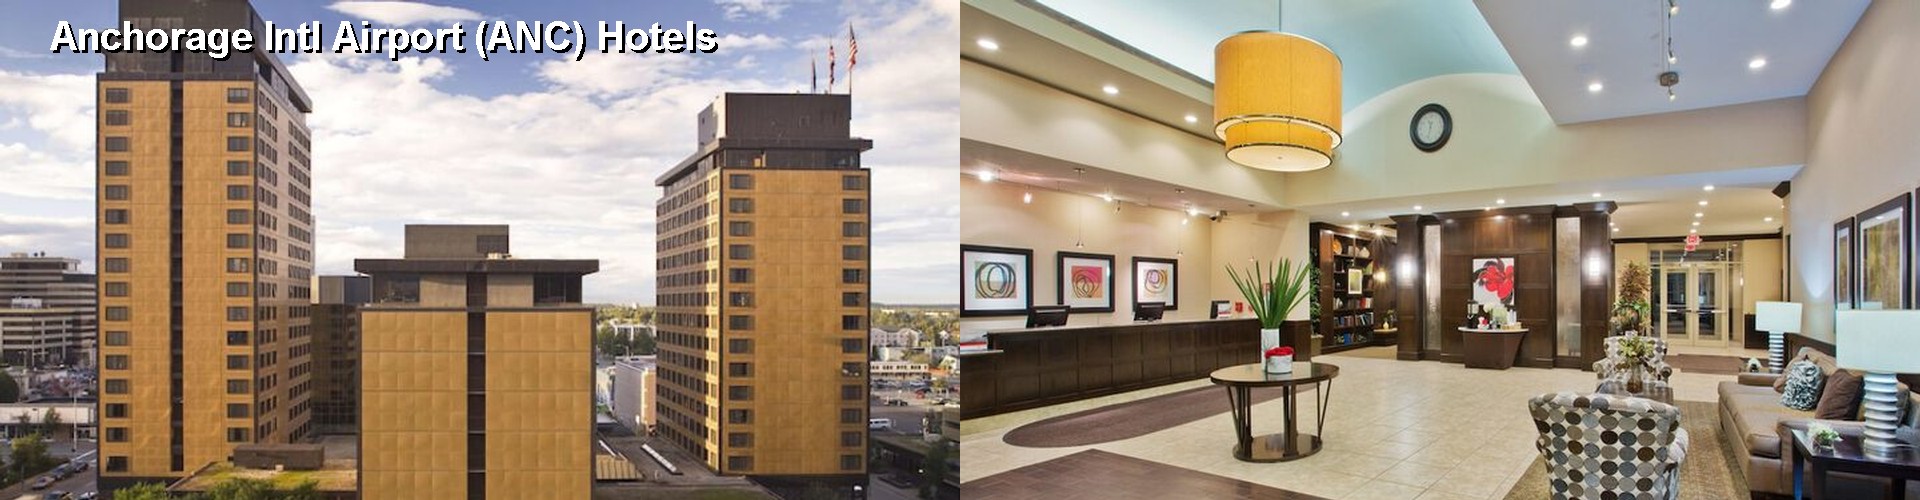 5 Best Hotels near Anchorage Intl Airport (ANC)